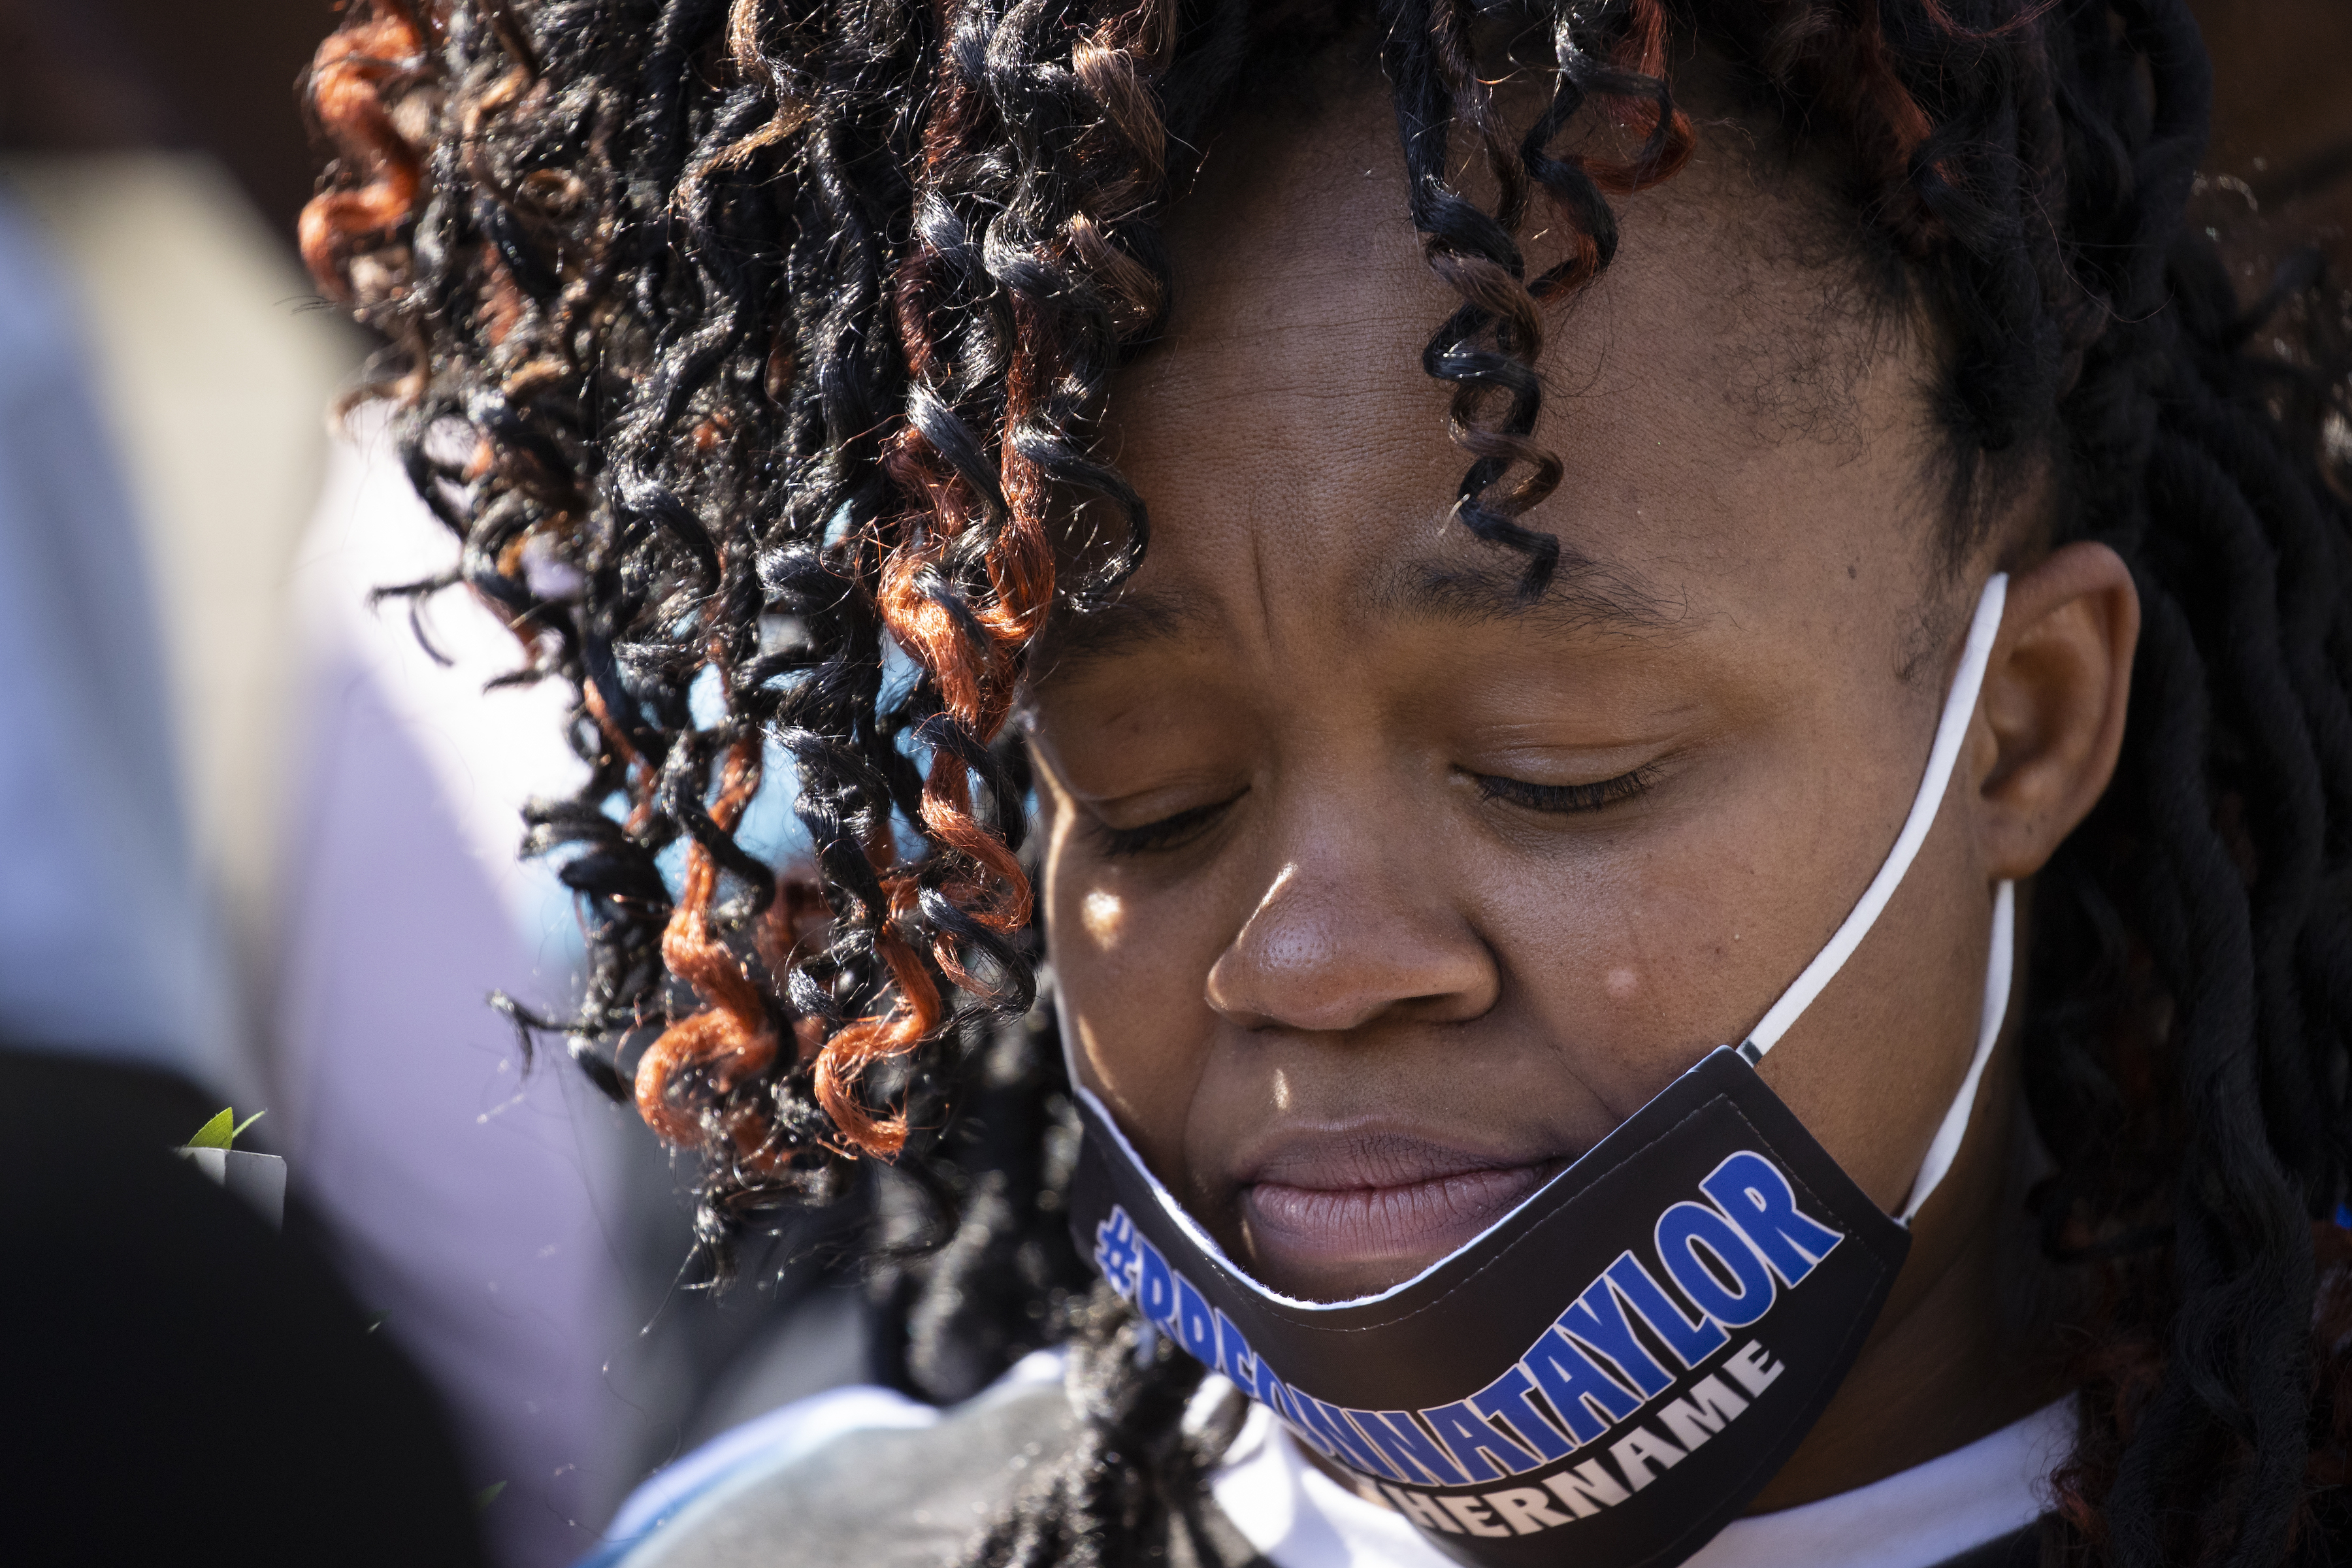 Tamika Palmer, Breonna Taylor's mother, is overcome with emotions during a vigil for her daughter on June 6, 2020 in Louisville, Kentucky. (Brett Carlsen—Getty Images)